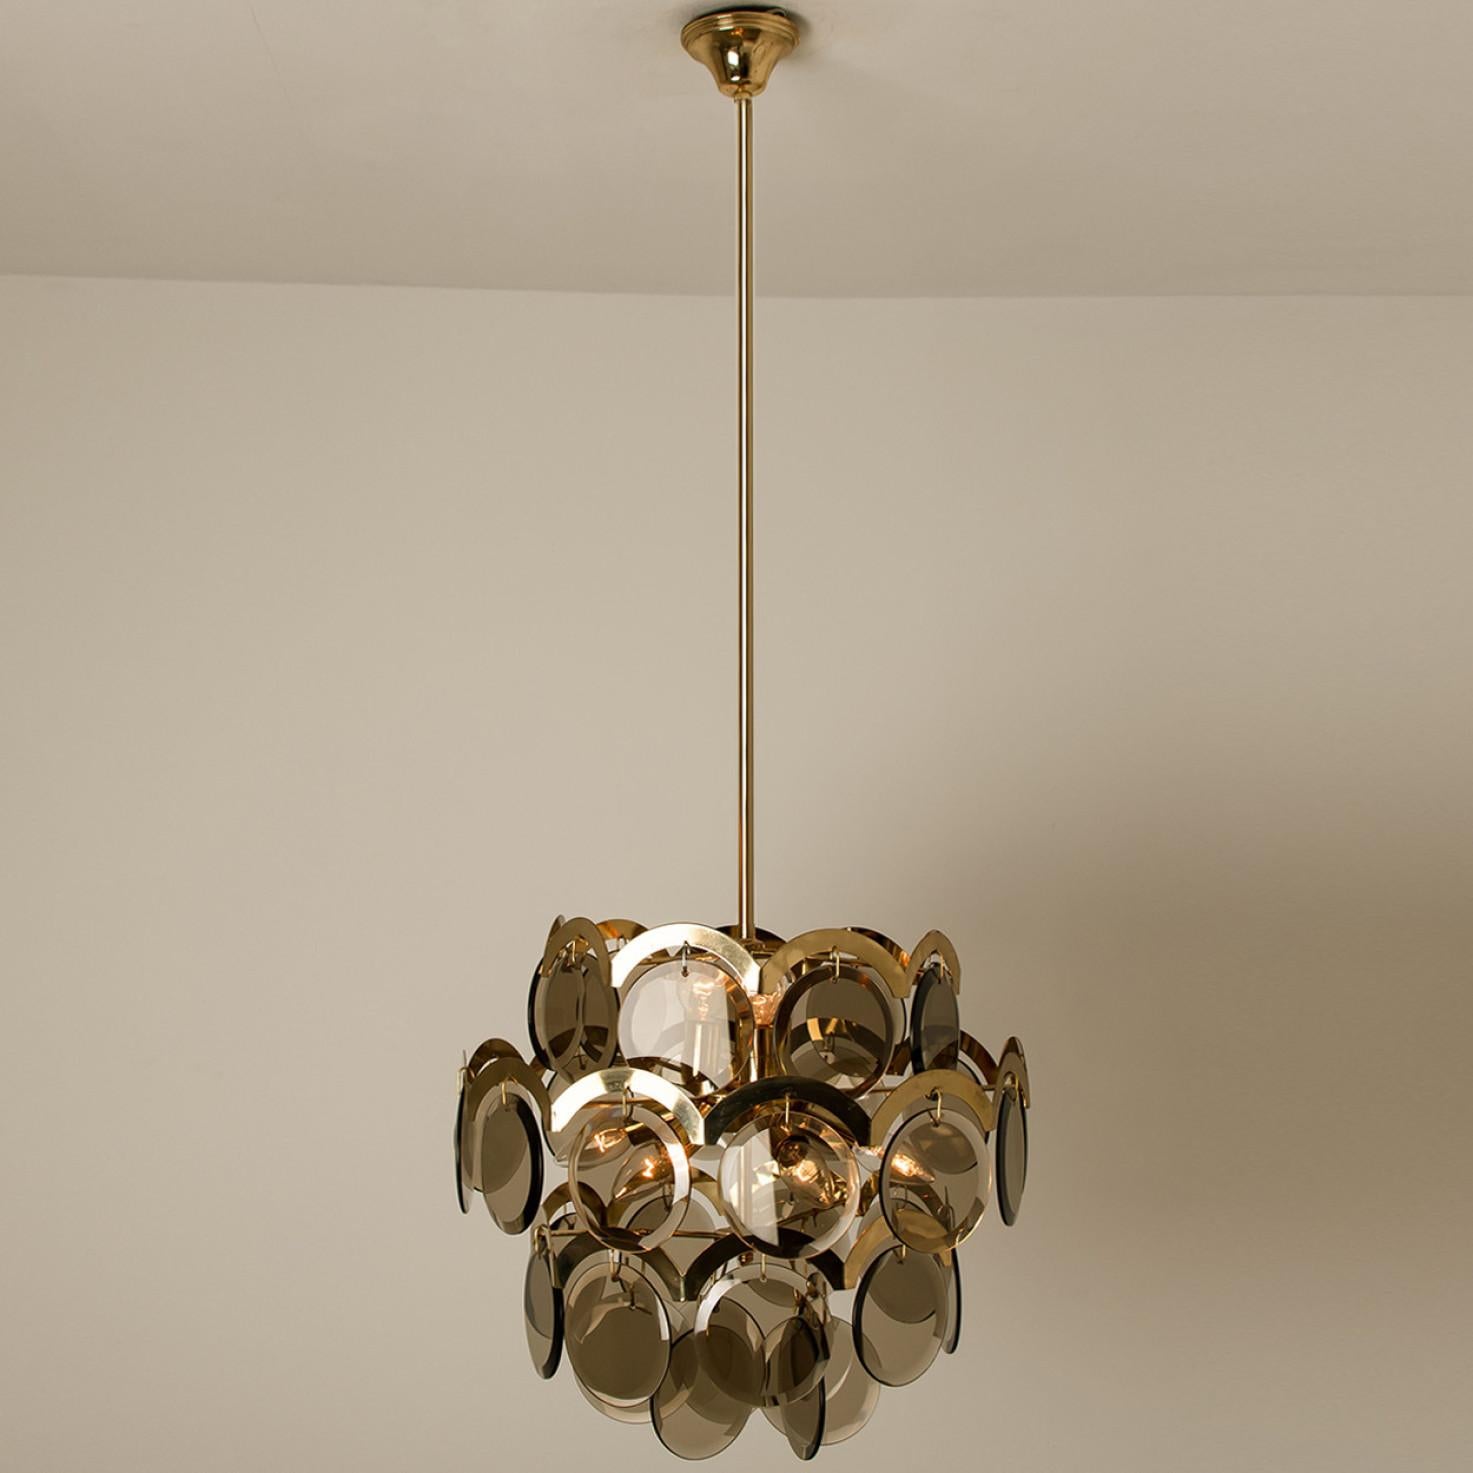 Mid-20th Century Pair of Large Smoked Glass and Brass Chandelier in the Style of Vistosi, Italy For Sale